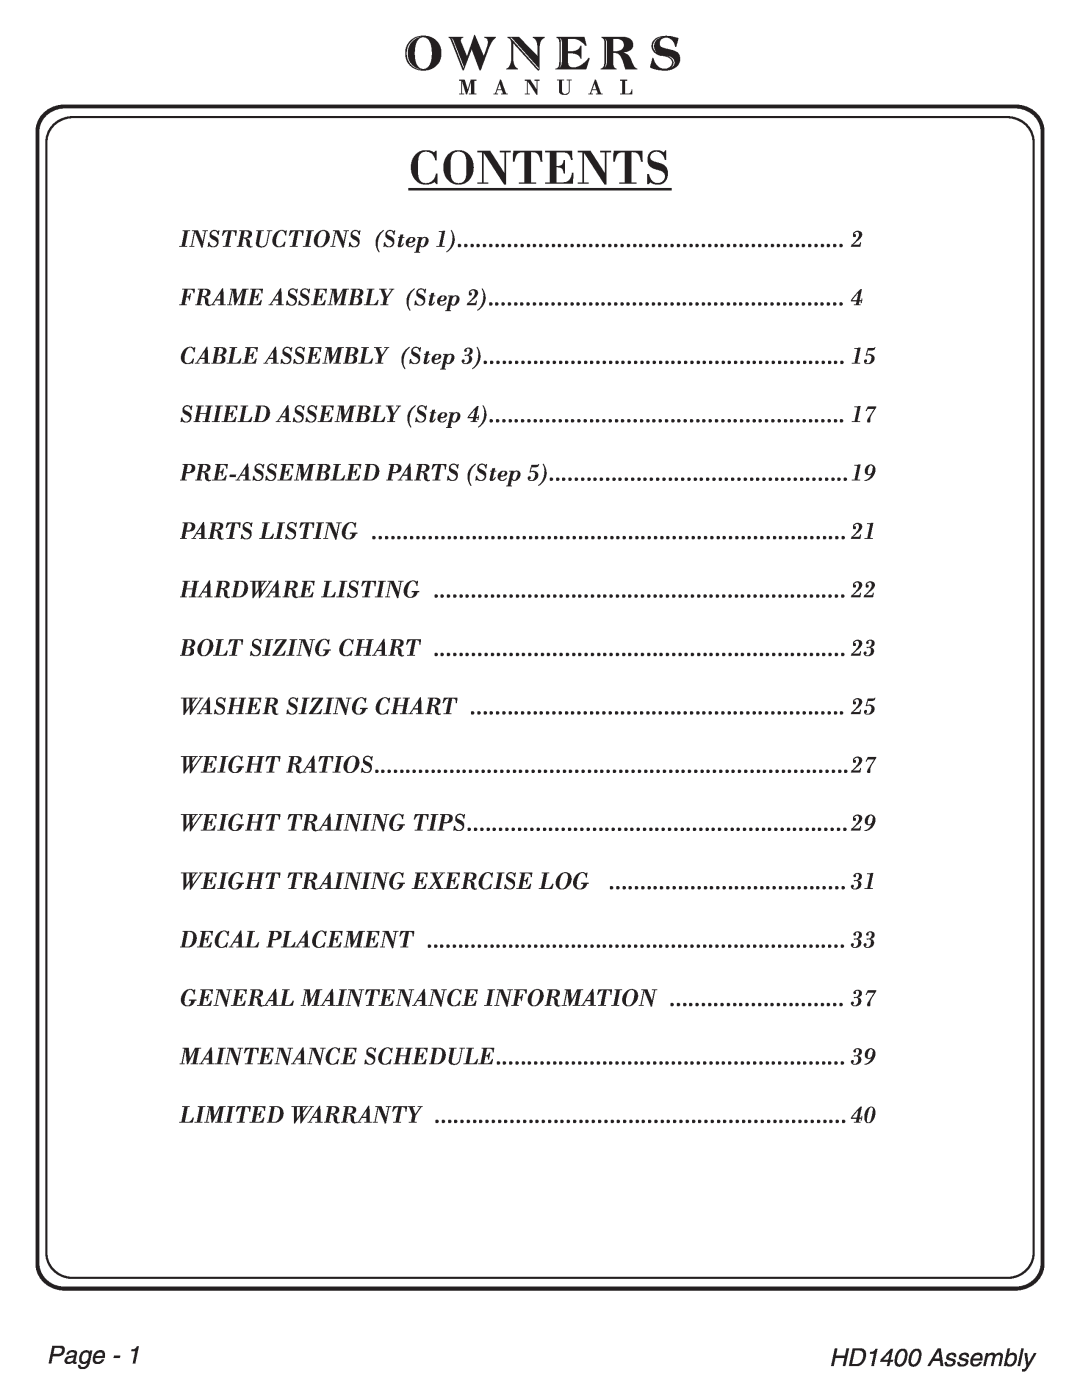 Hoist Fitness HDI400 owner manual Contents, Owners, Weight Training Exercise Log, General Maintenance Information, Page 